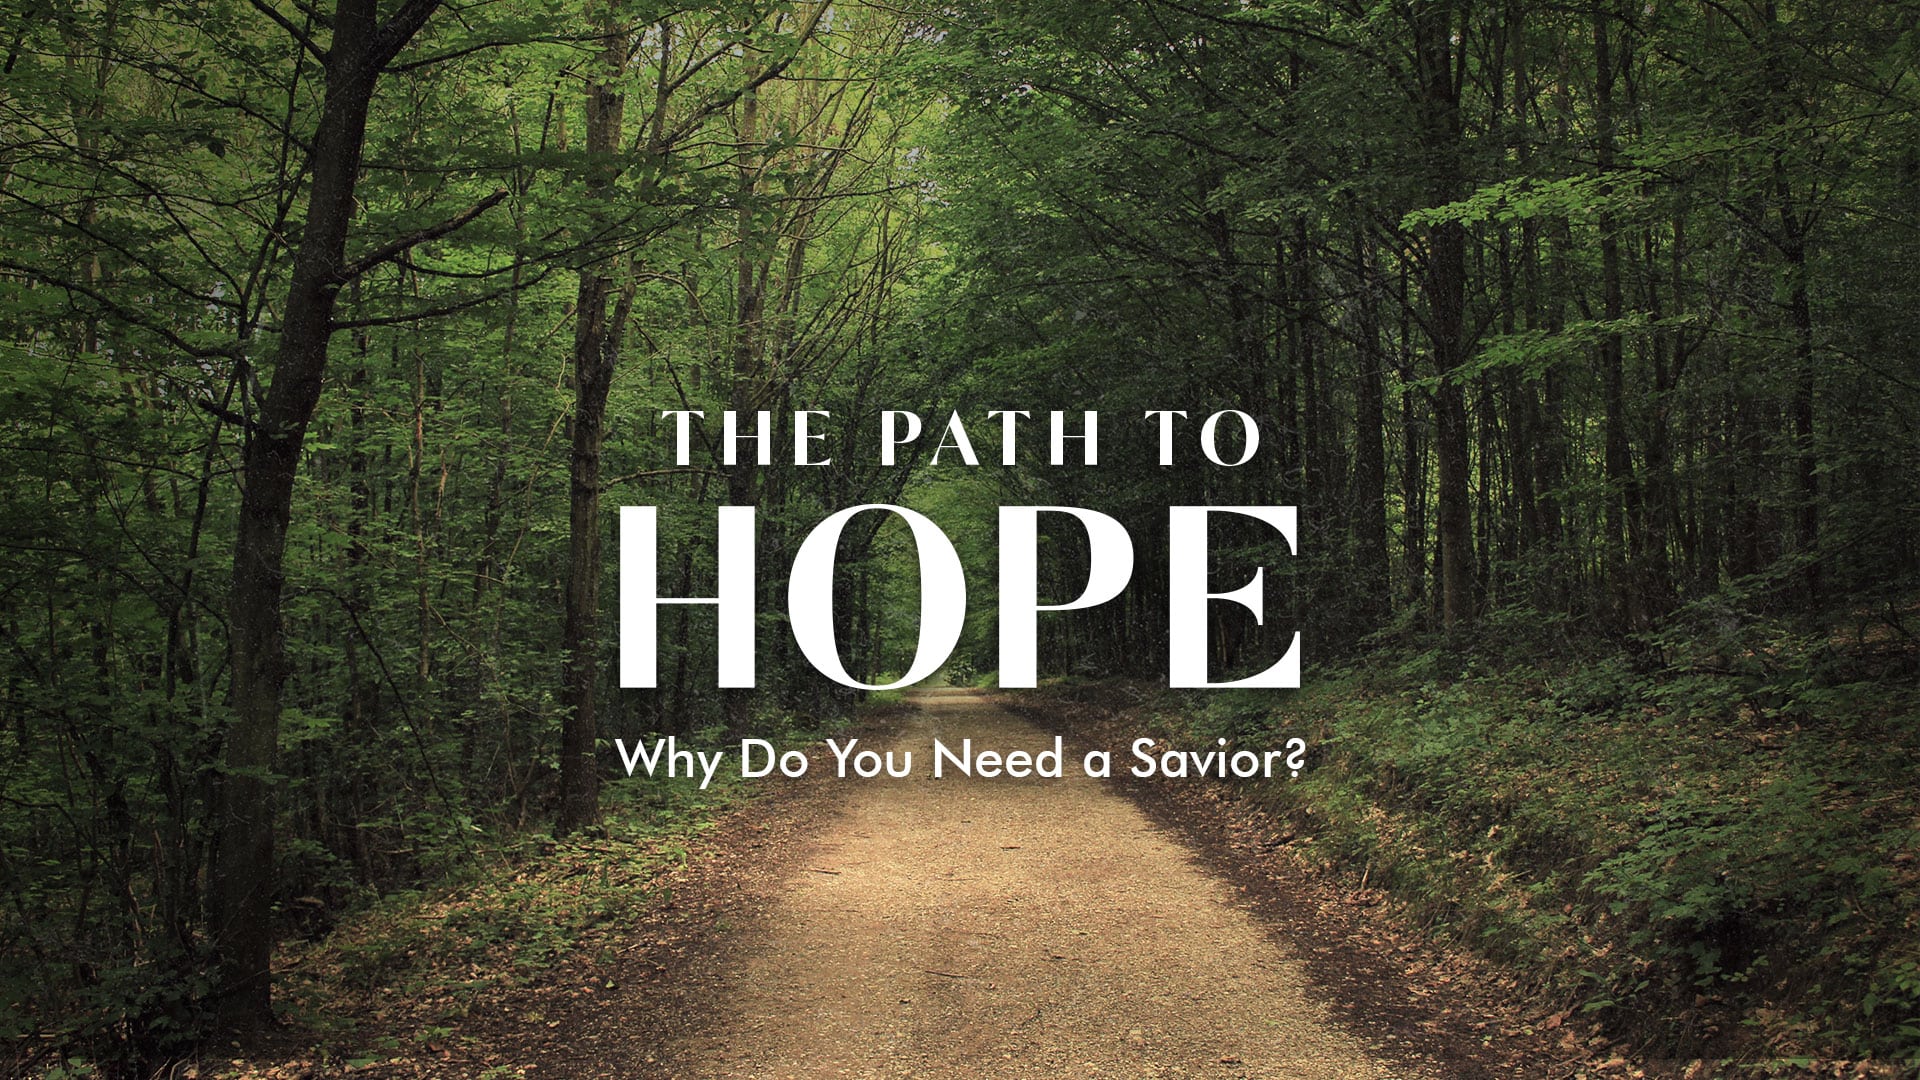 a forest path labeled the path to hope why do you need a savior?